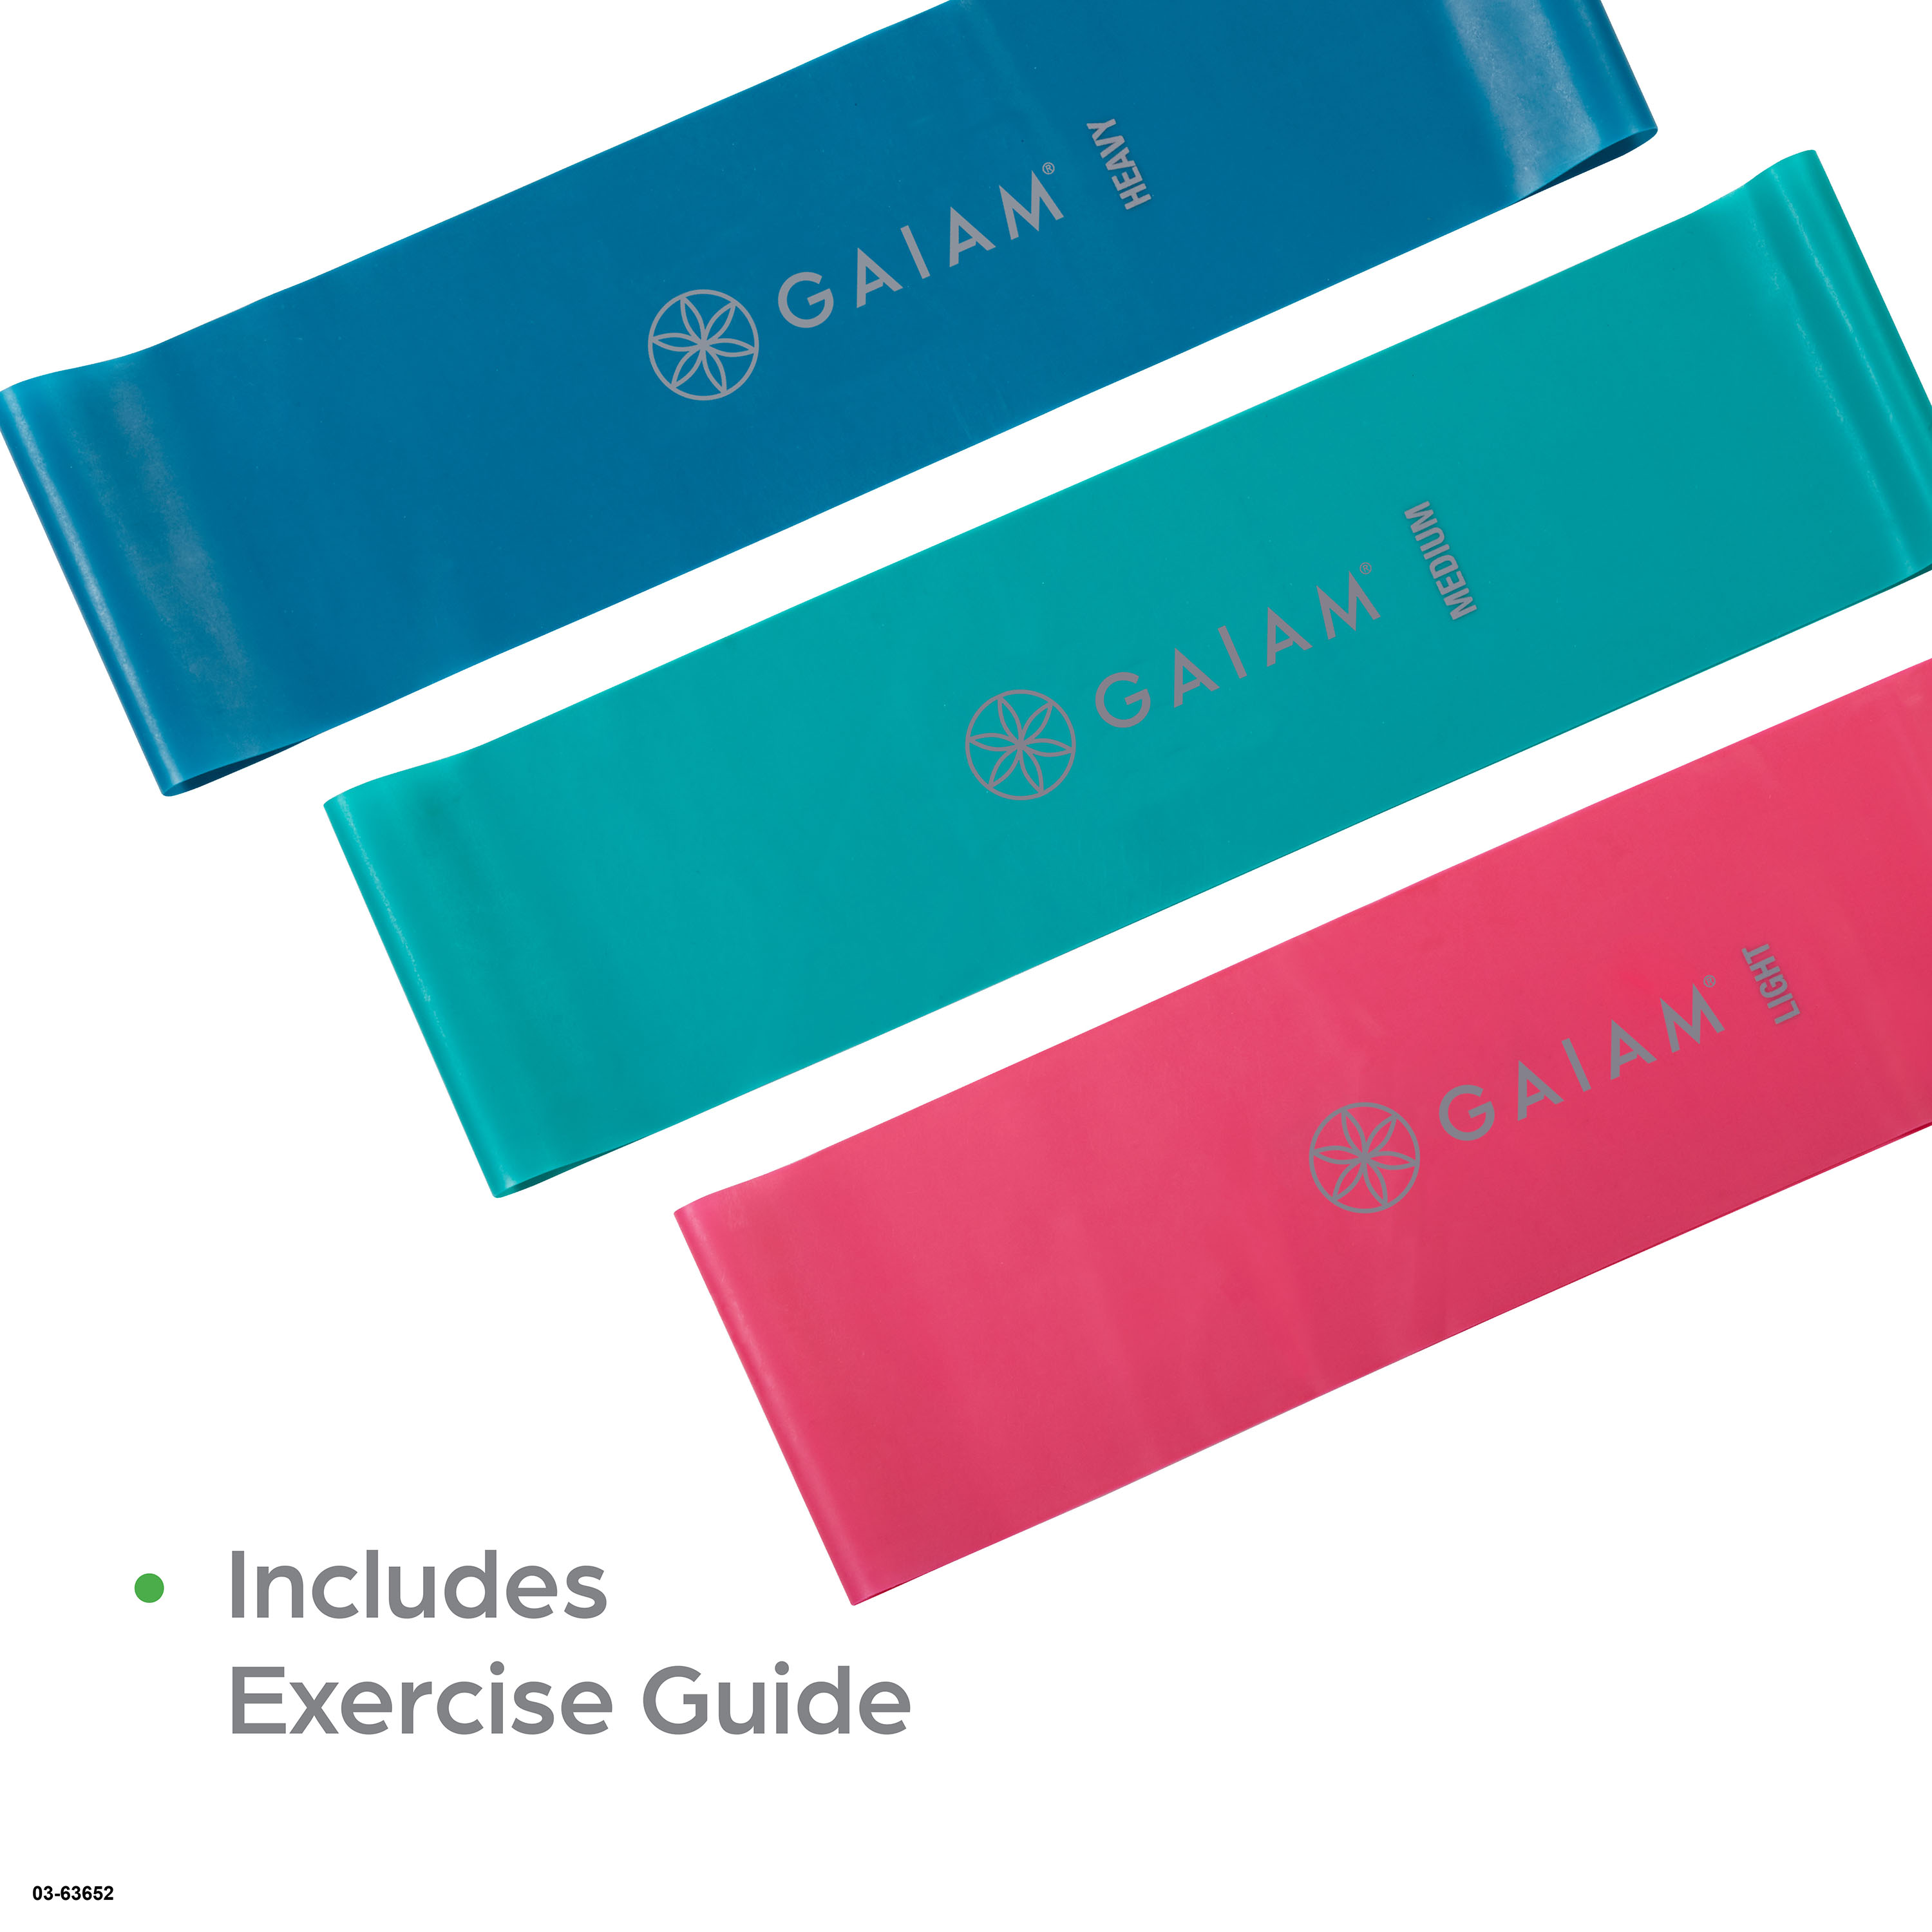 Gaiam Loop Band Kit, Includes Light, Medium and Heavy Resistance Levels, 3 Pk - image 2 of 6